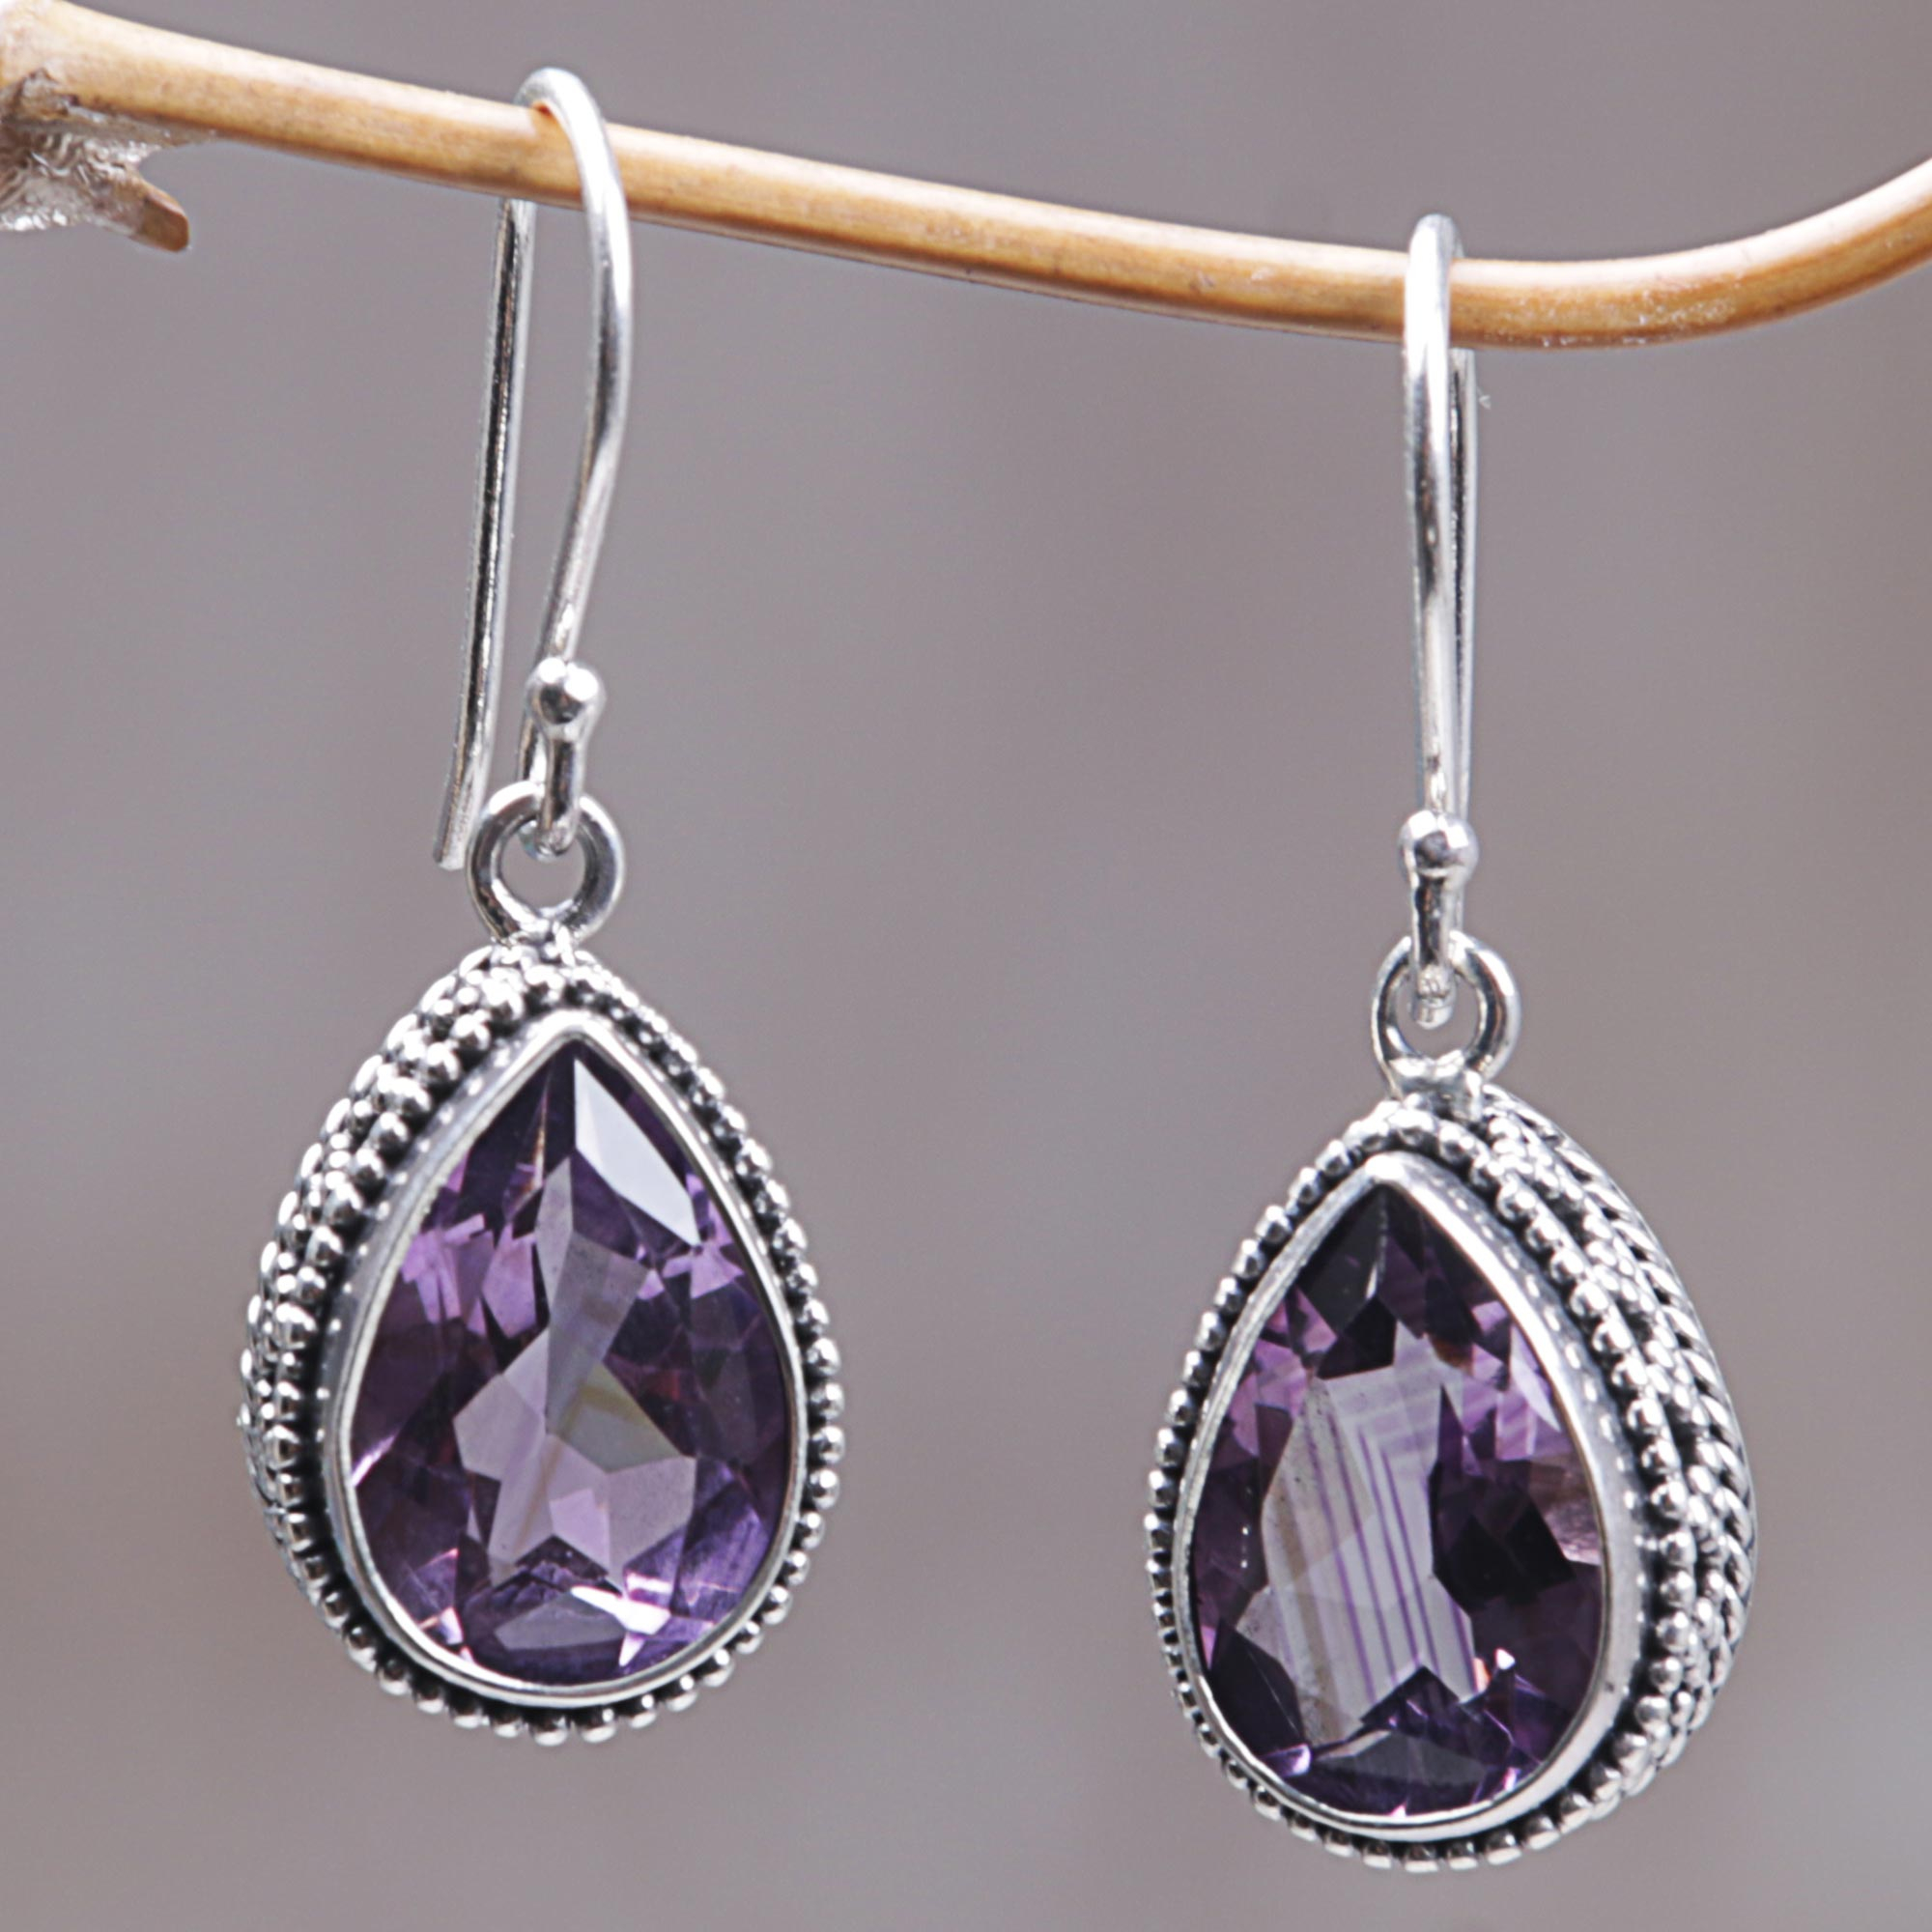 UNICEF Market | 925 Silver Earrings with Amethyst Total 8 Carats from ...